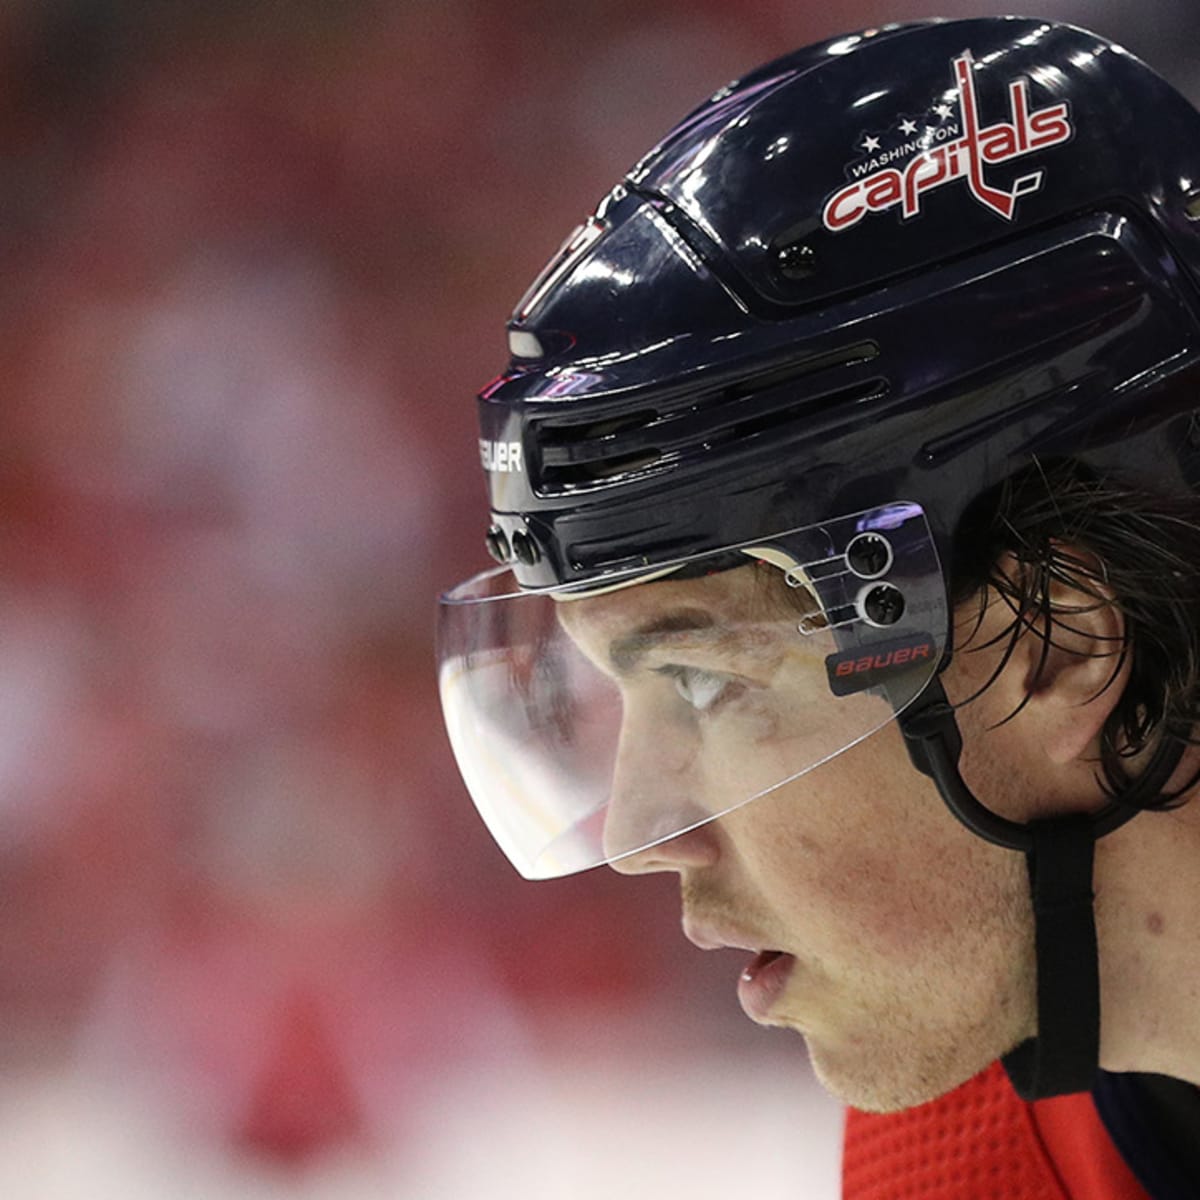 Washington Capitals: T.J. Oshie will be player to watch against Sabres